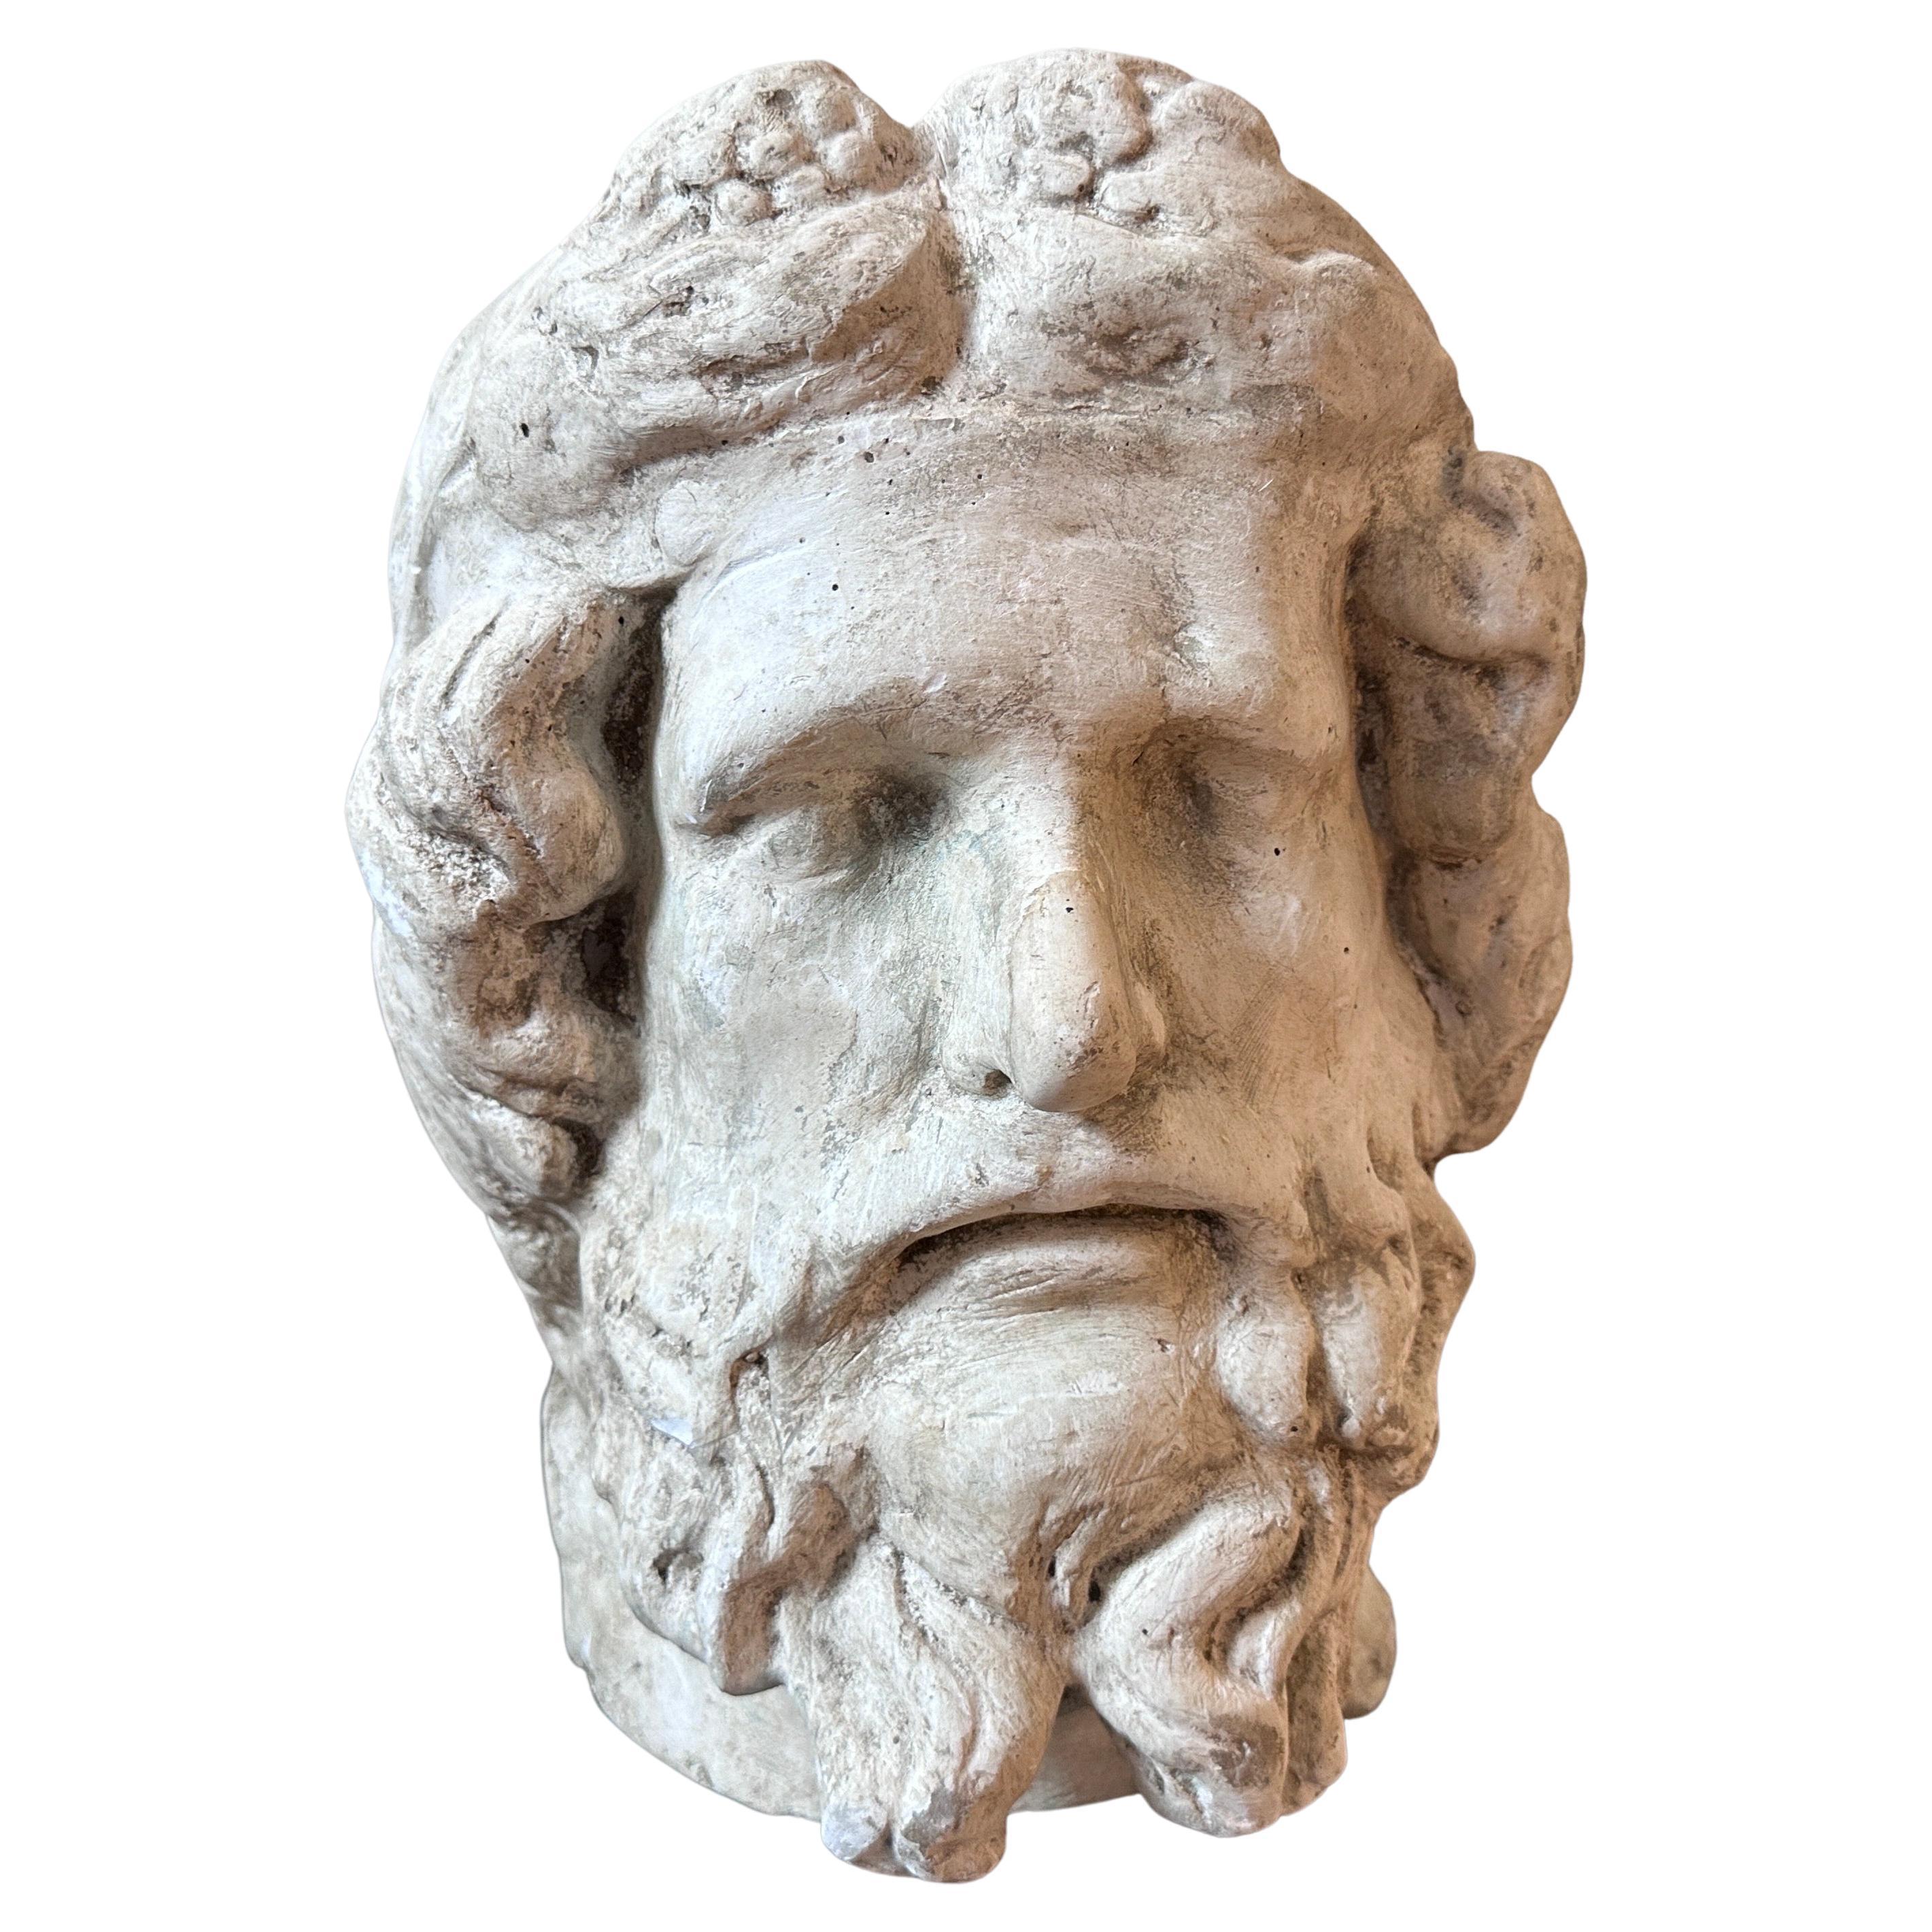 A Serapis plaster head hand-crafted in Italy by school art students in 1930s, it depicts the facial features and characteristics associated with this deity from ancient Egypt. The head showcases a bearded male figure with a serene expression,